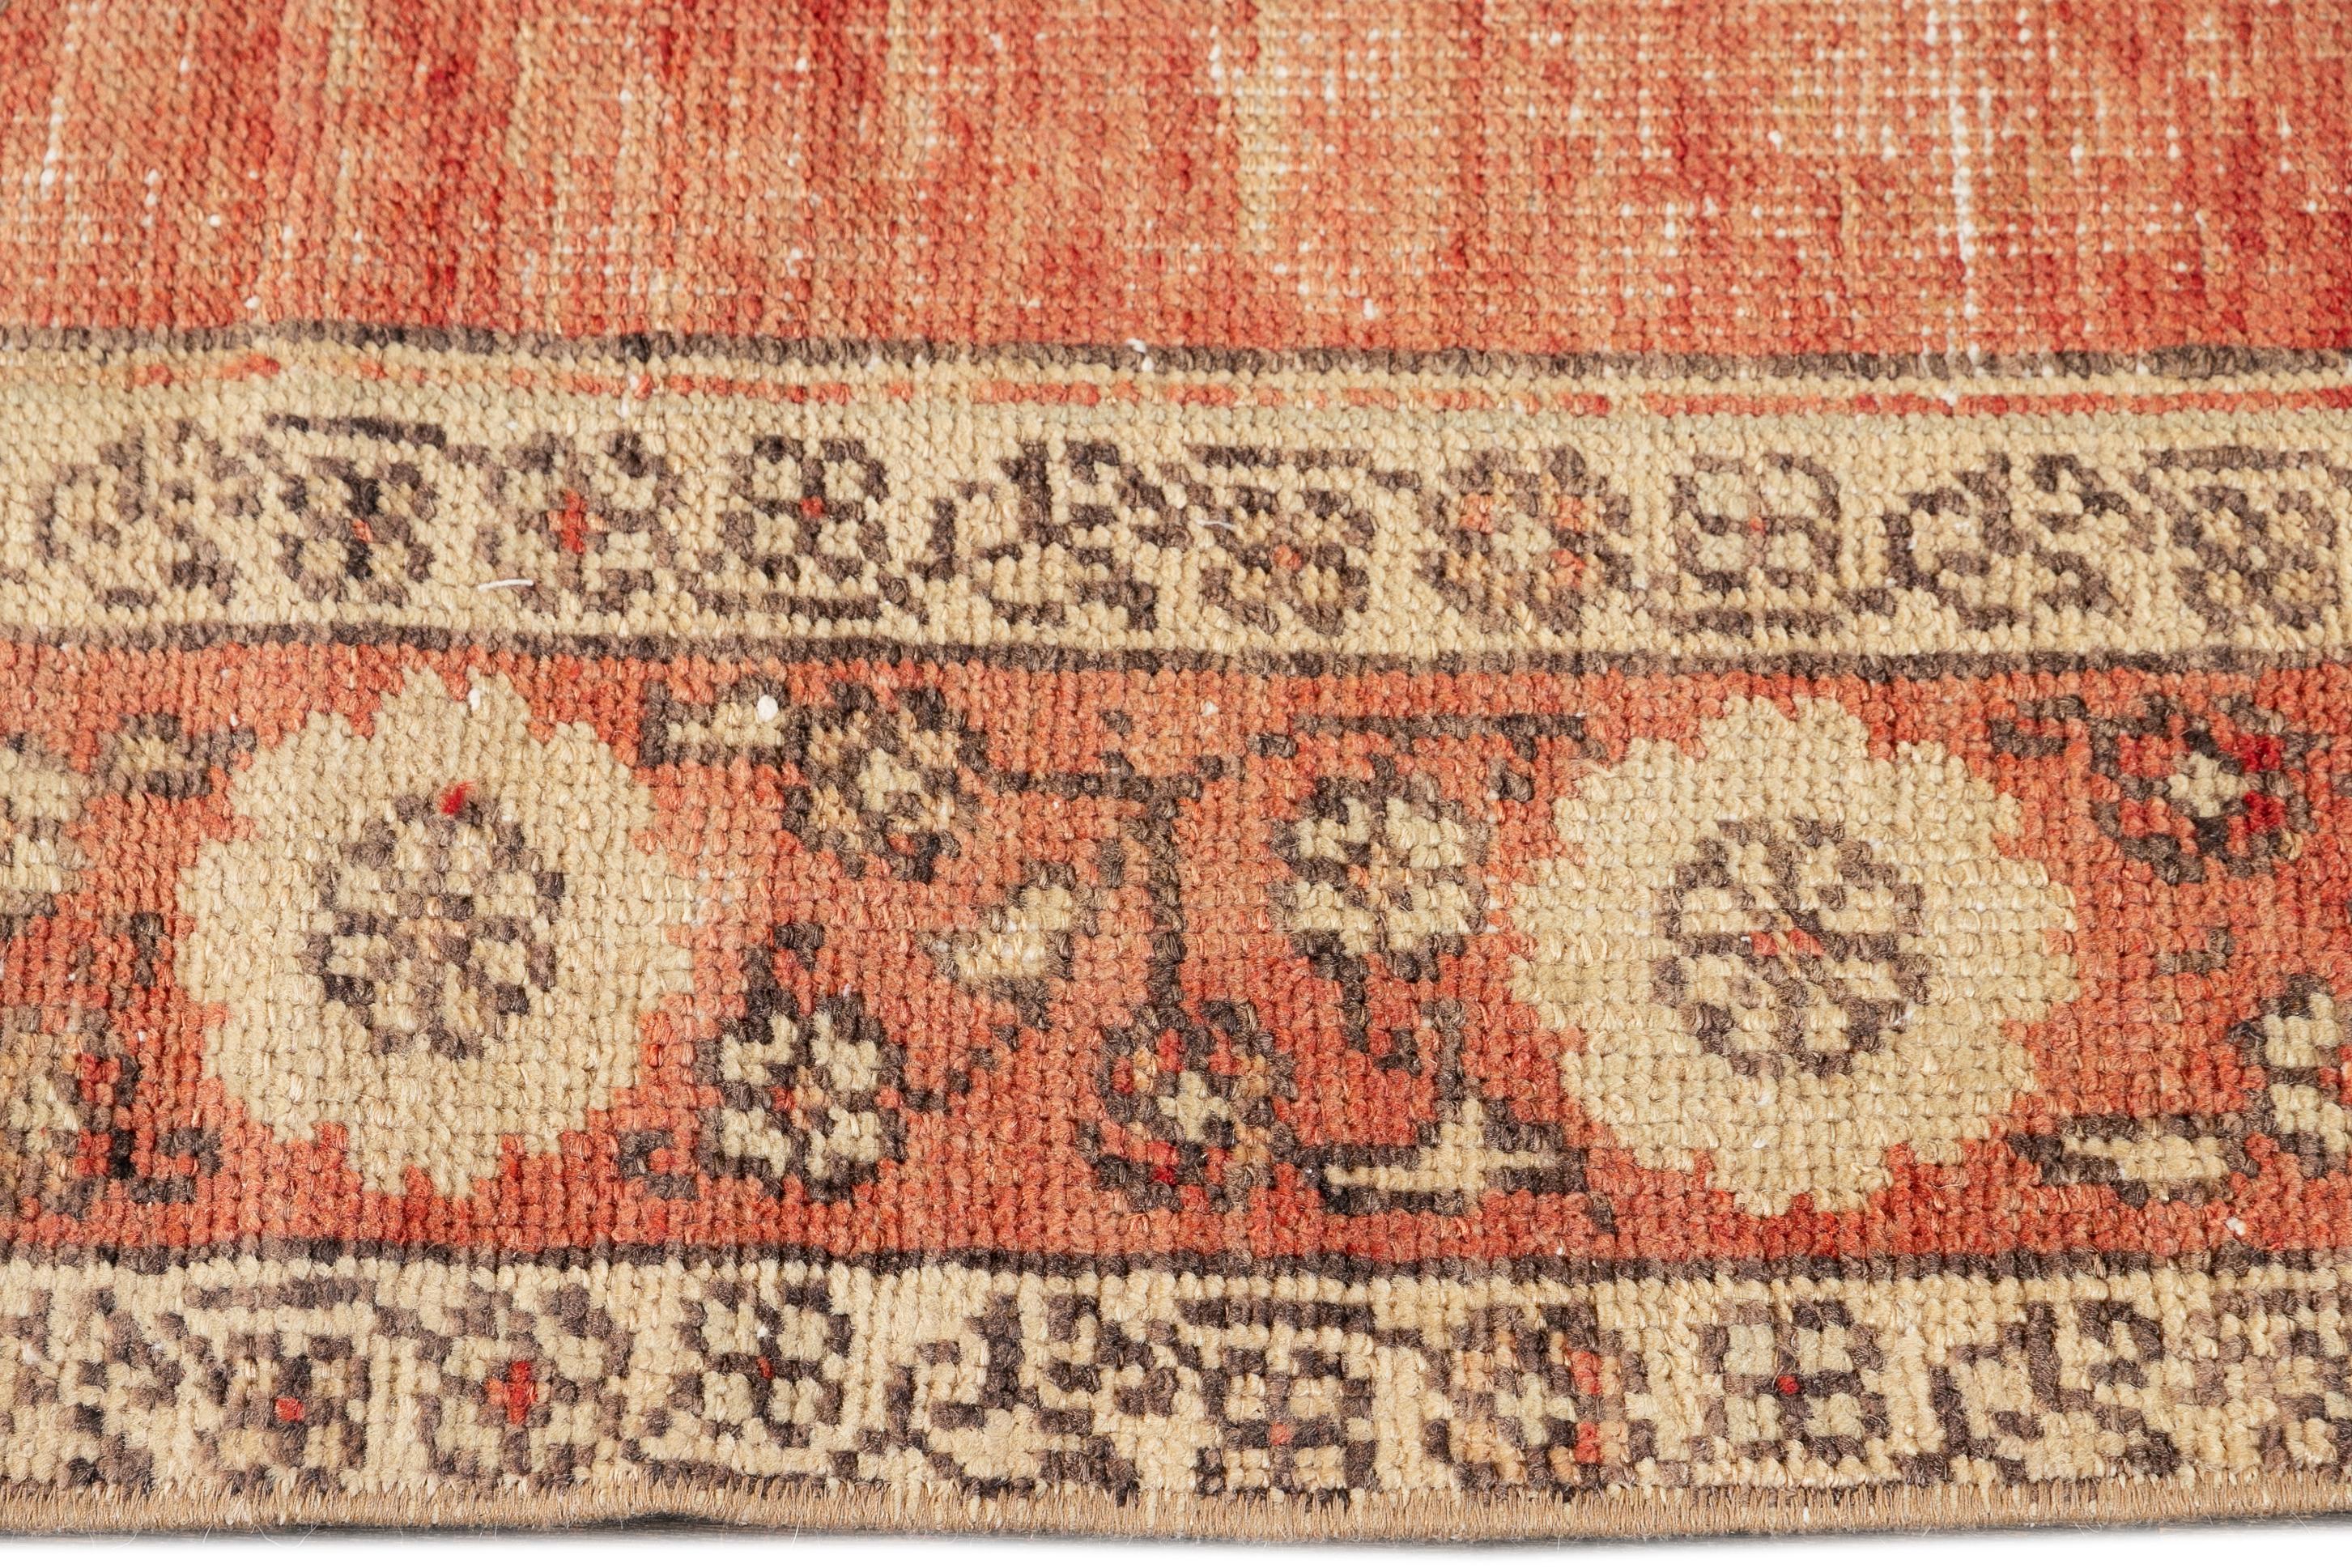 Early 20th Century Antique Anatolian Wool Runner Rug In Good Condition For Sale In Norwalk, CT